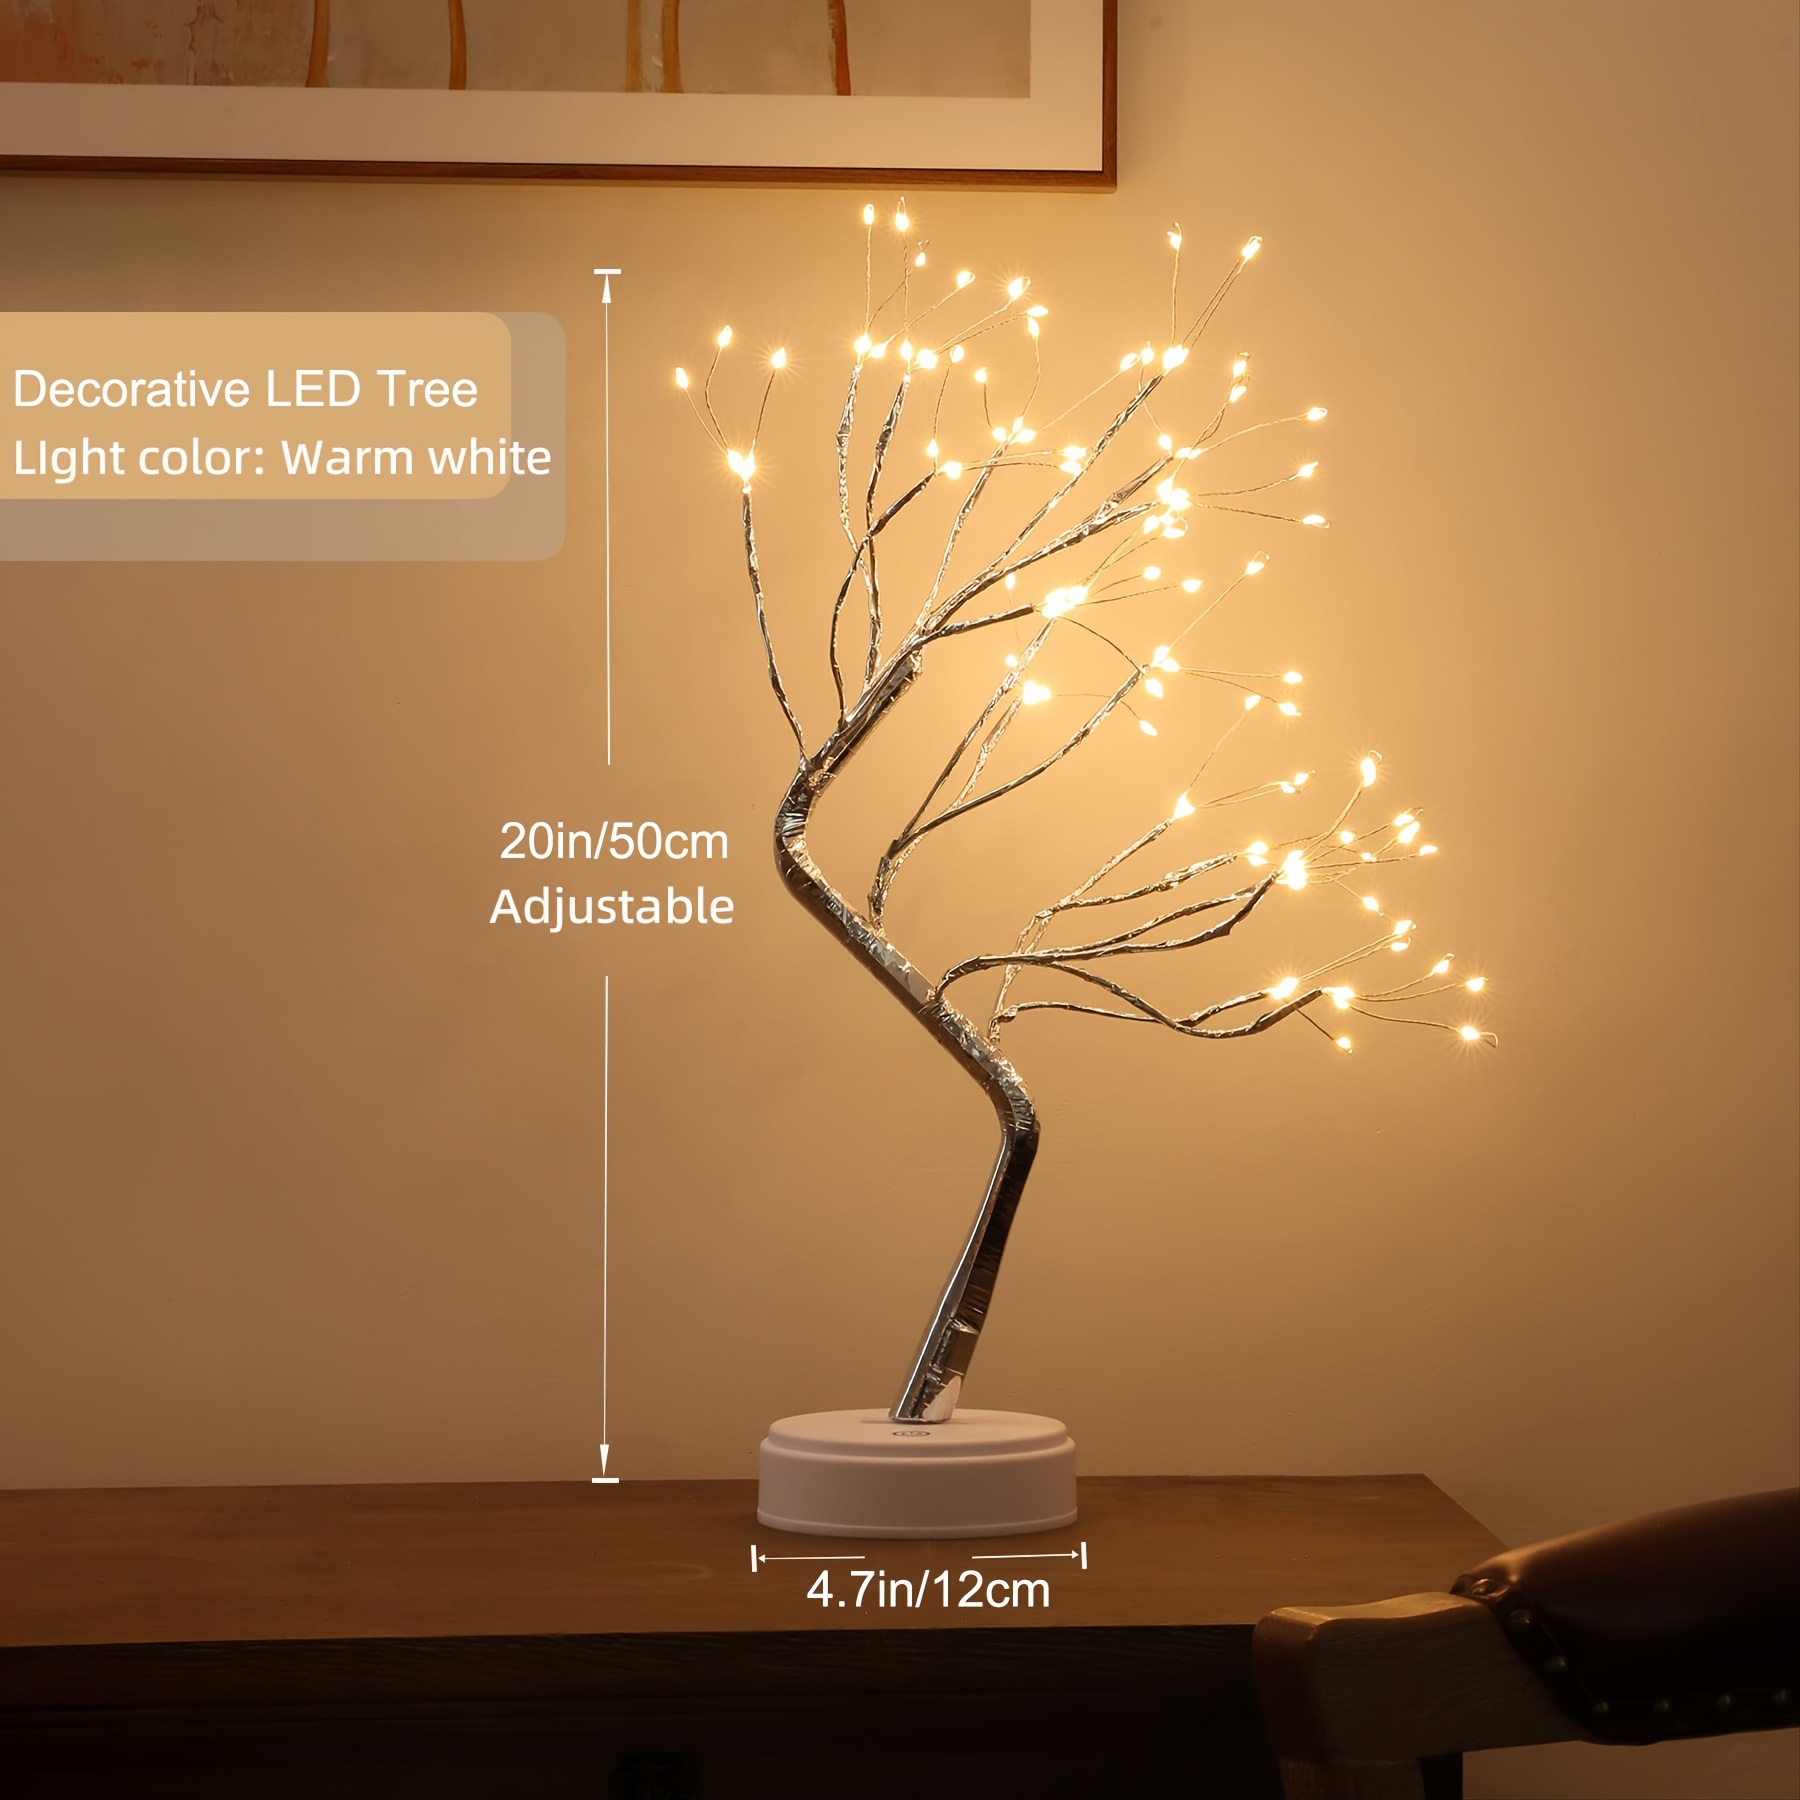 108 LED Tree Light Christmas Decoration | USB Battery Operated | Touch Switch